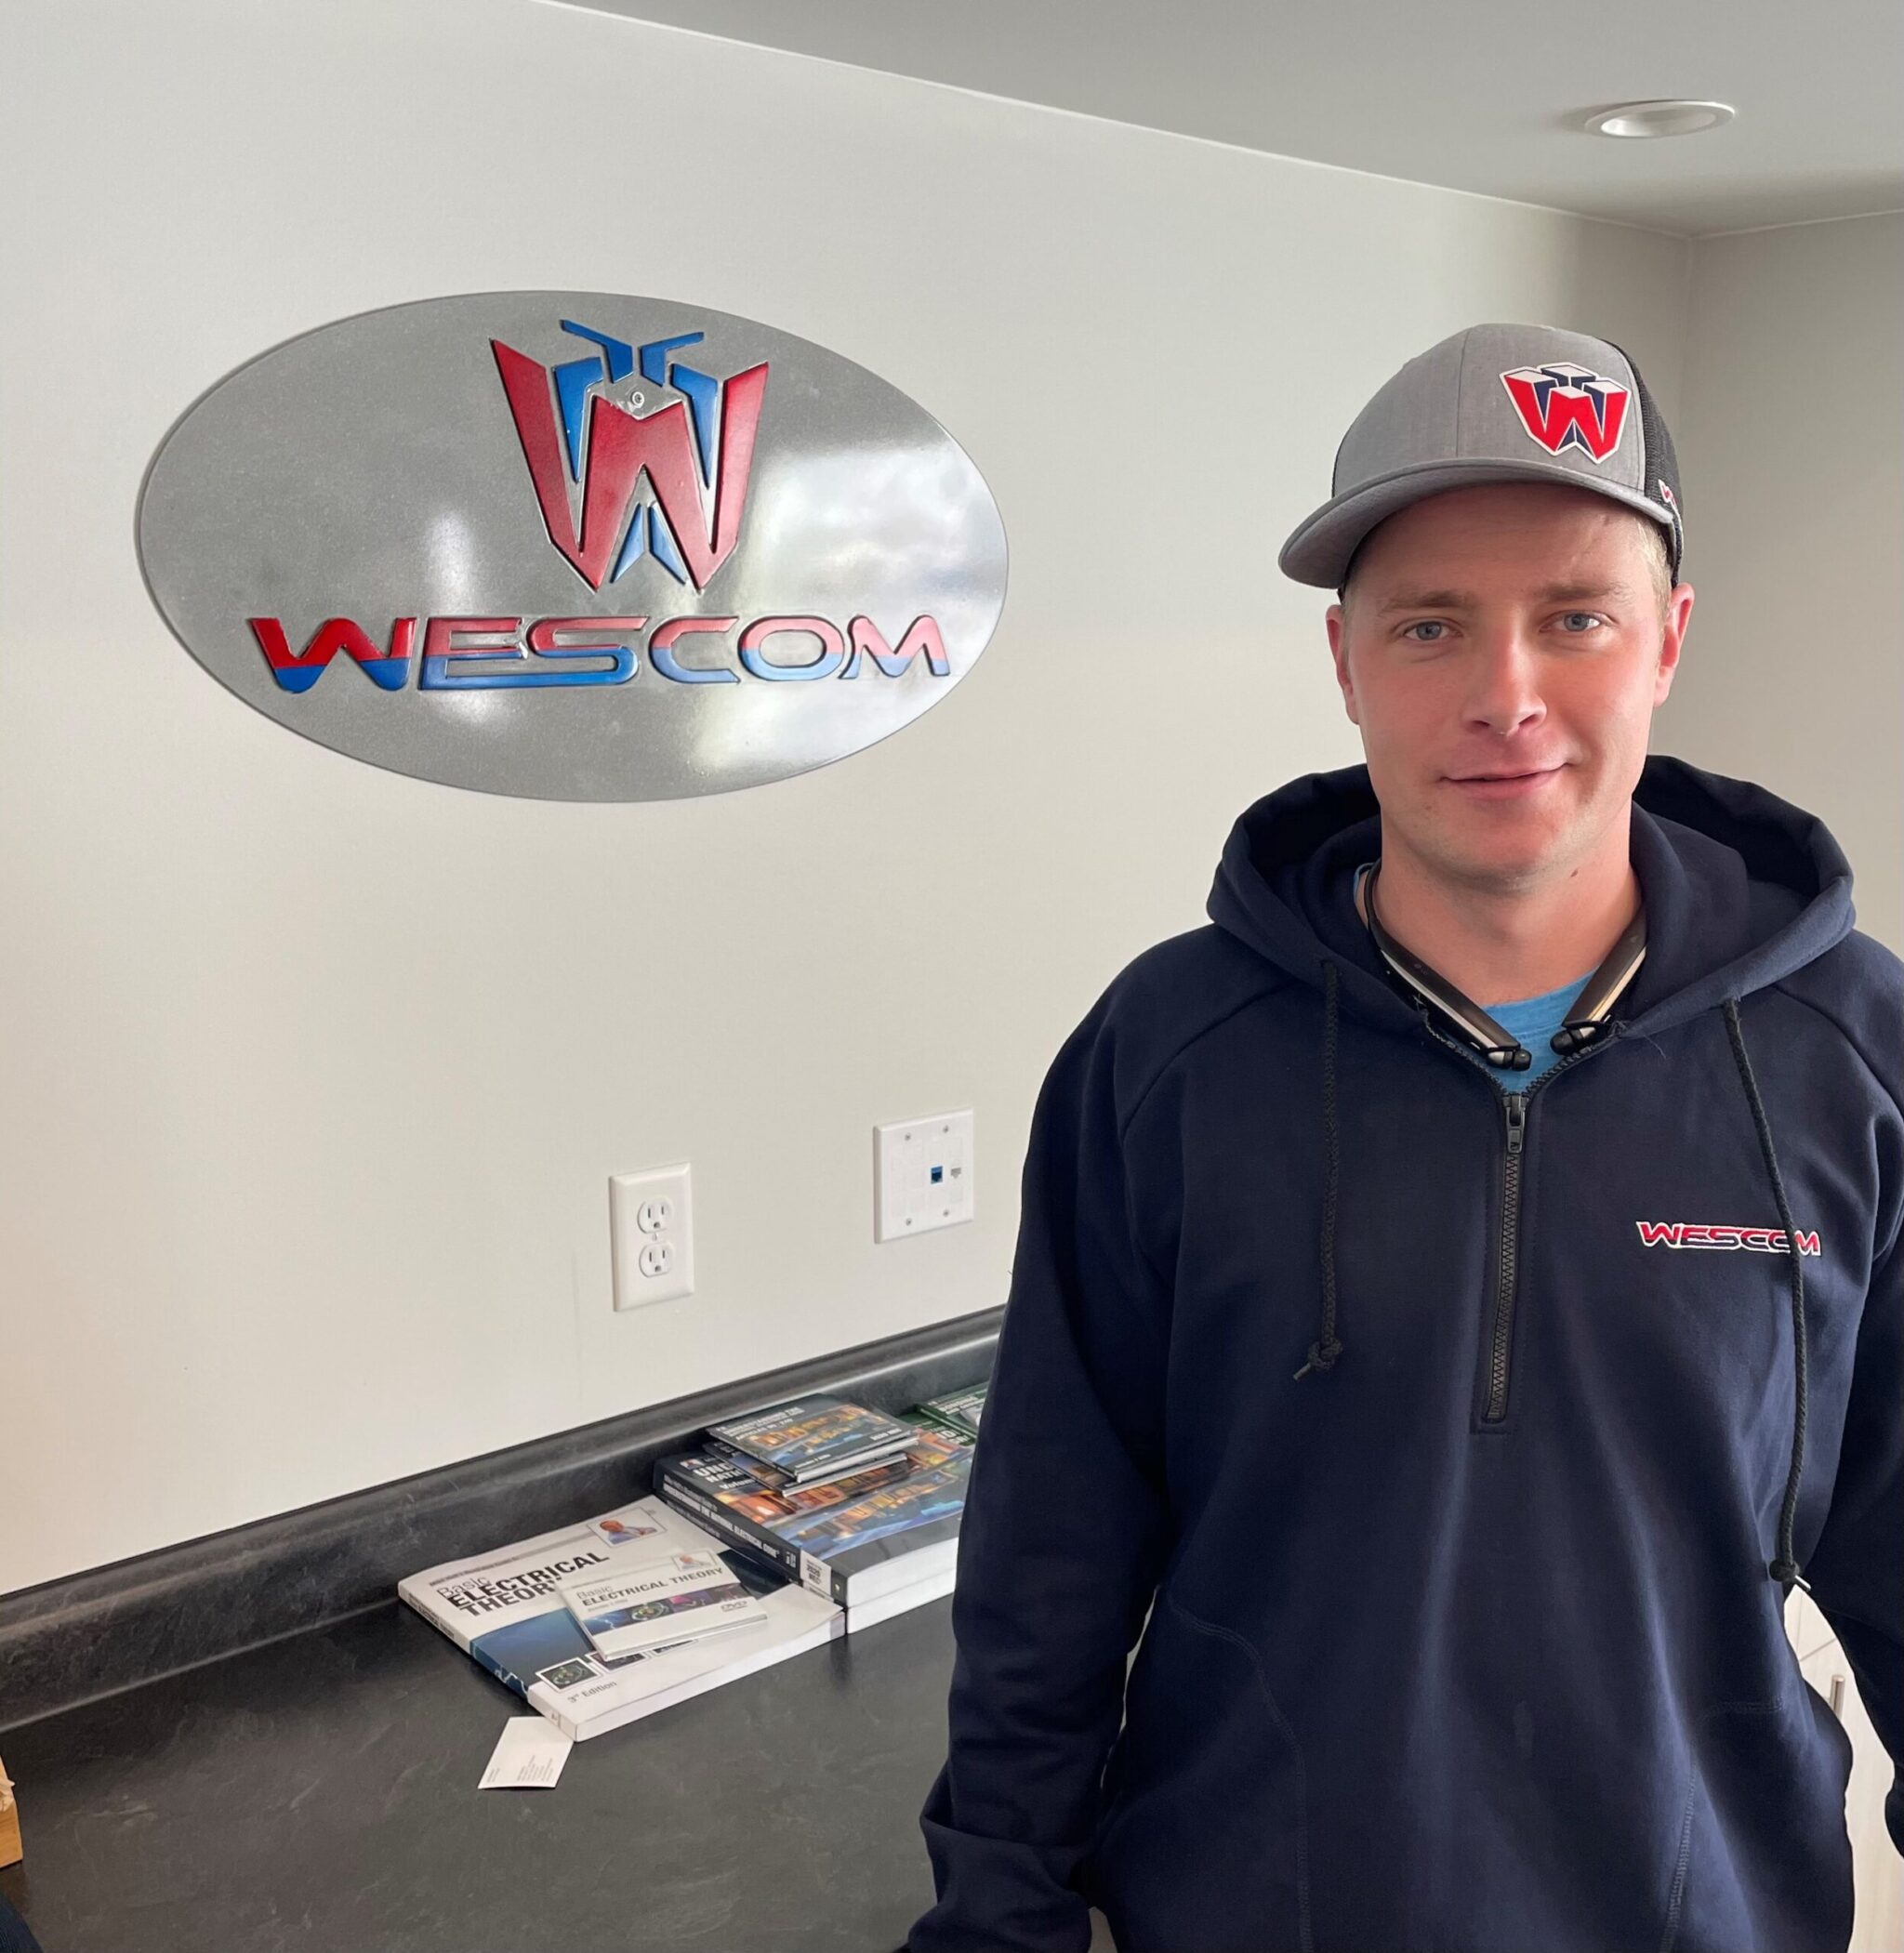 Cory Aili in front of wescom logo with wescom hat and shirt on